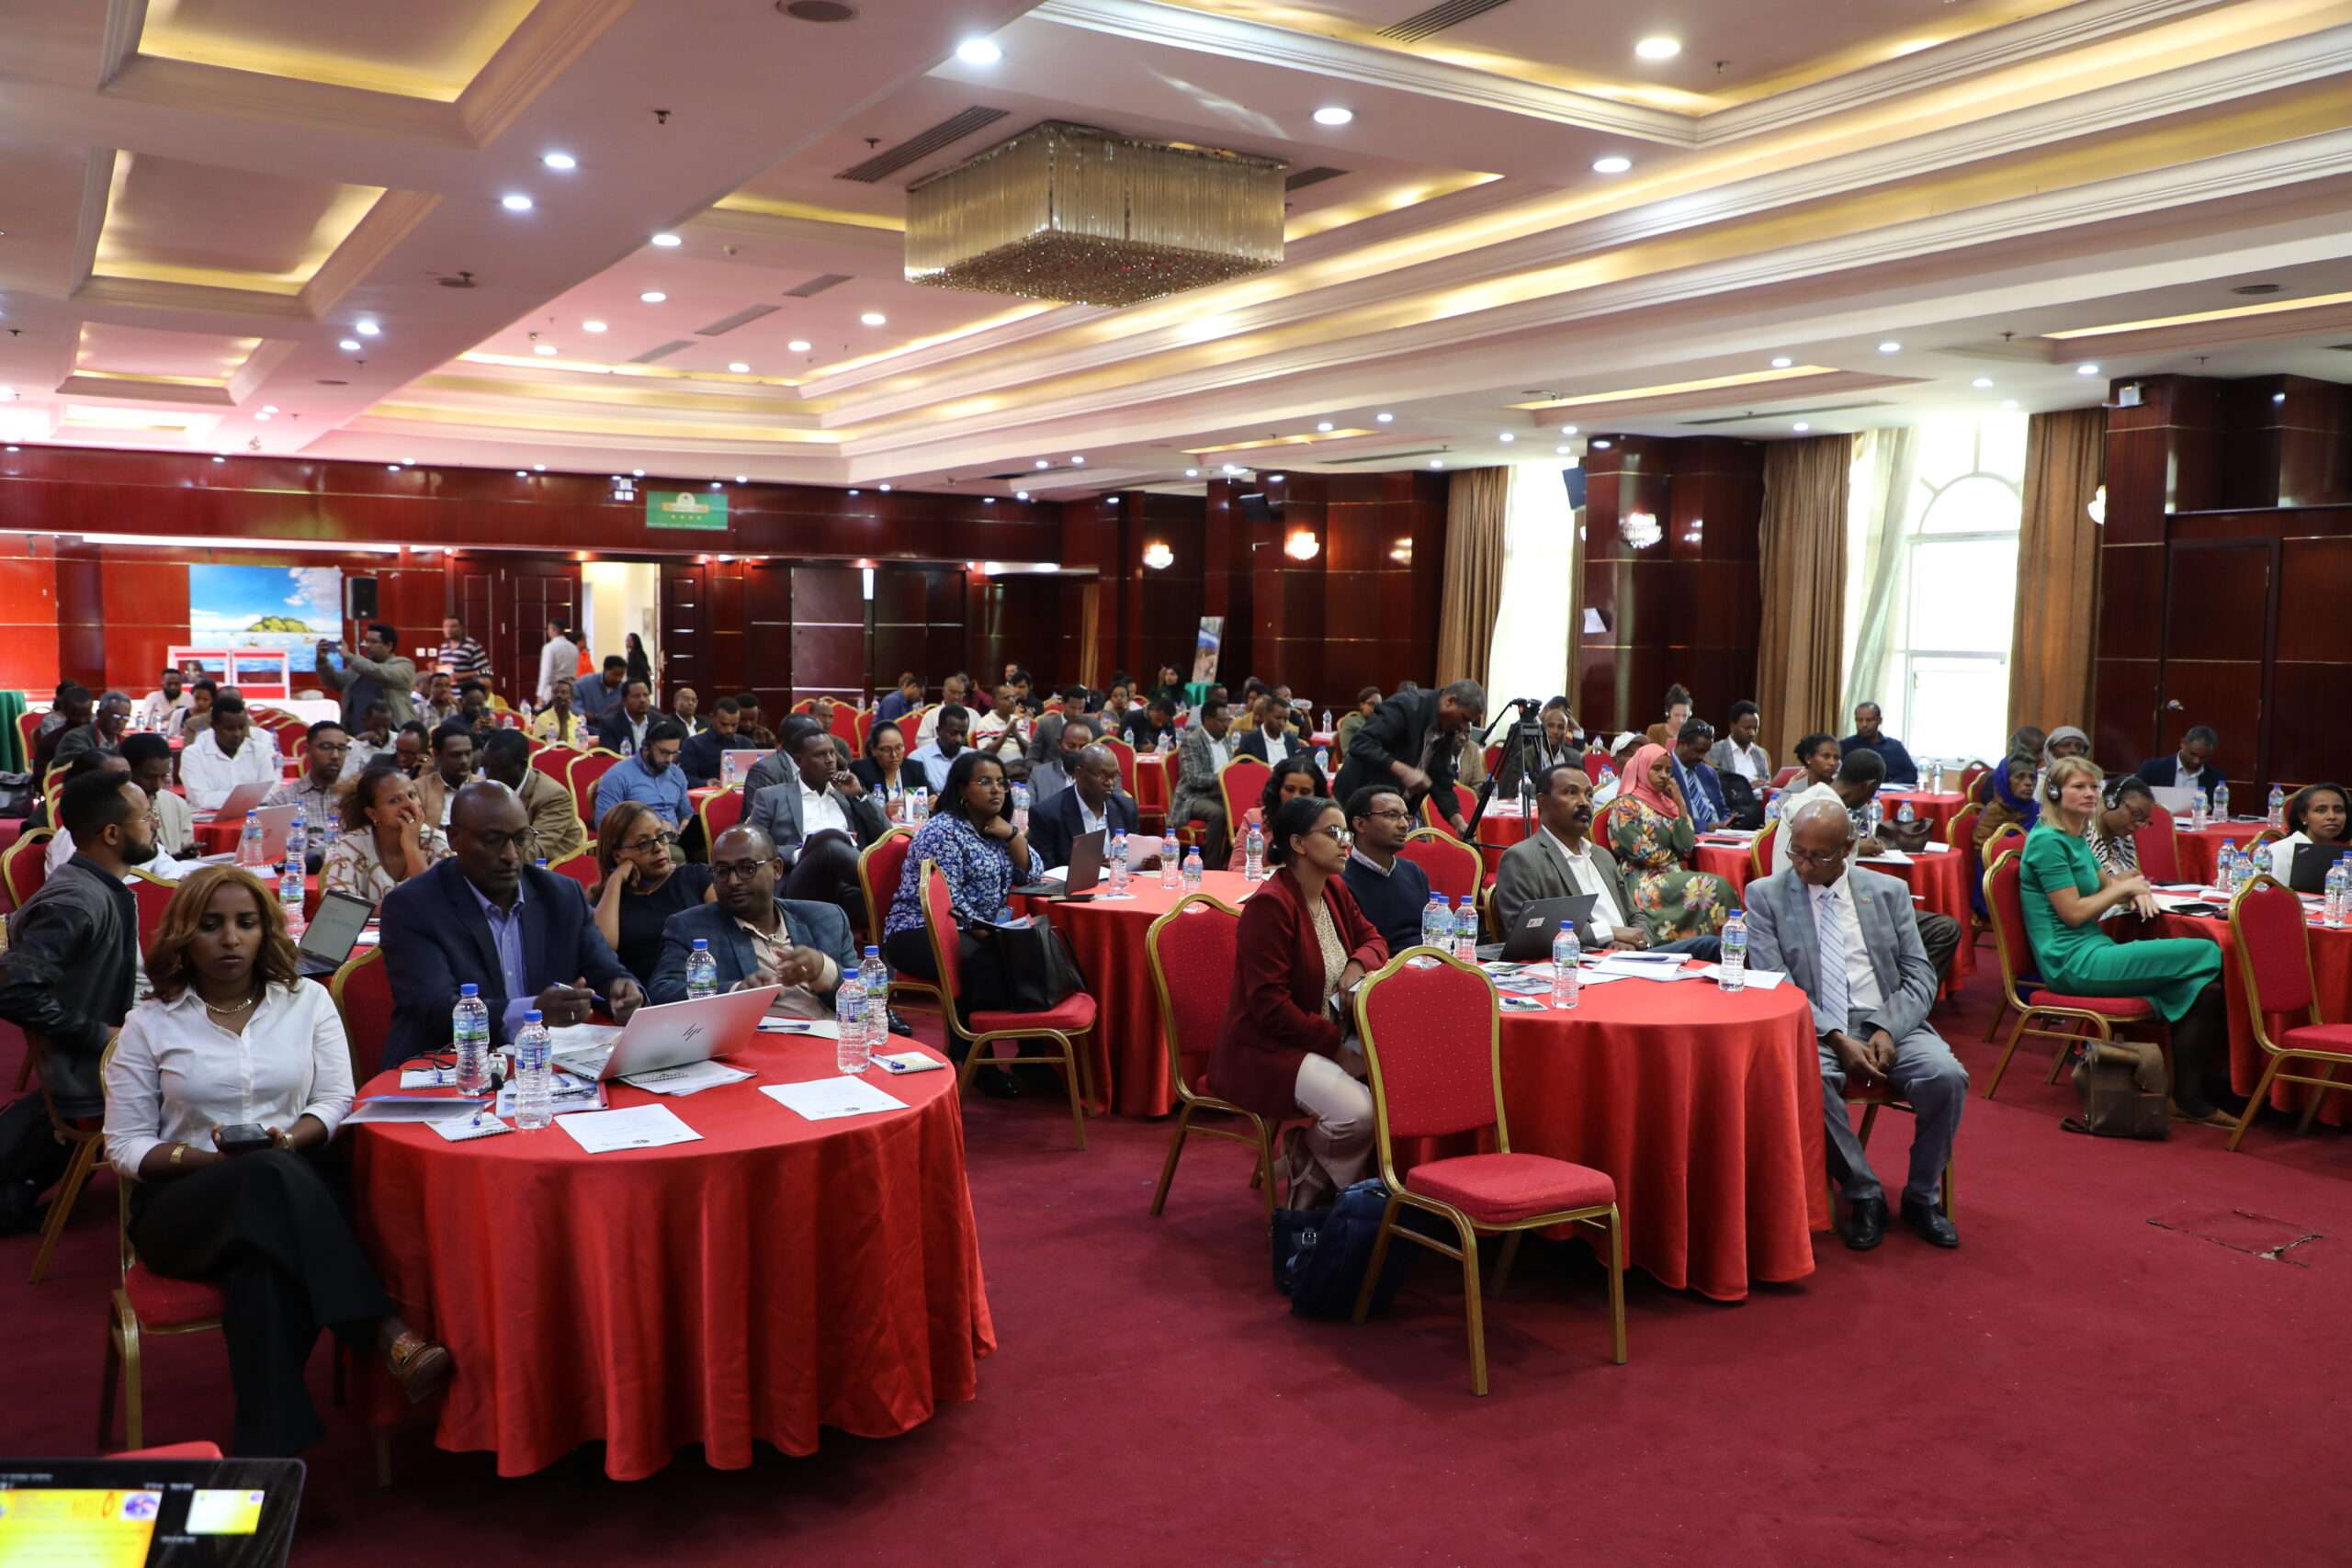 National conference on the situation of IDPs in Ethiopia: (Re)imagining the path for durable solutions 